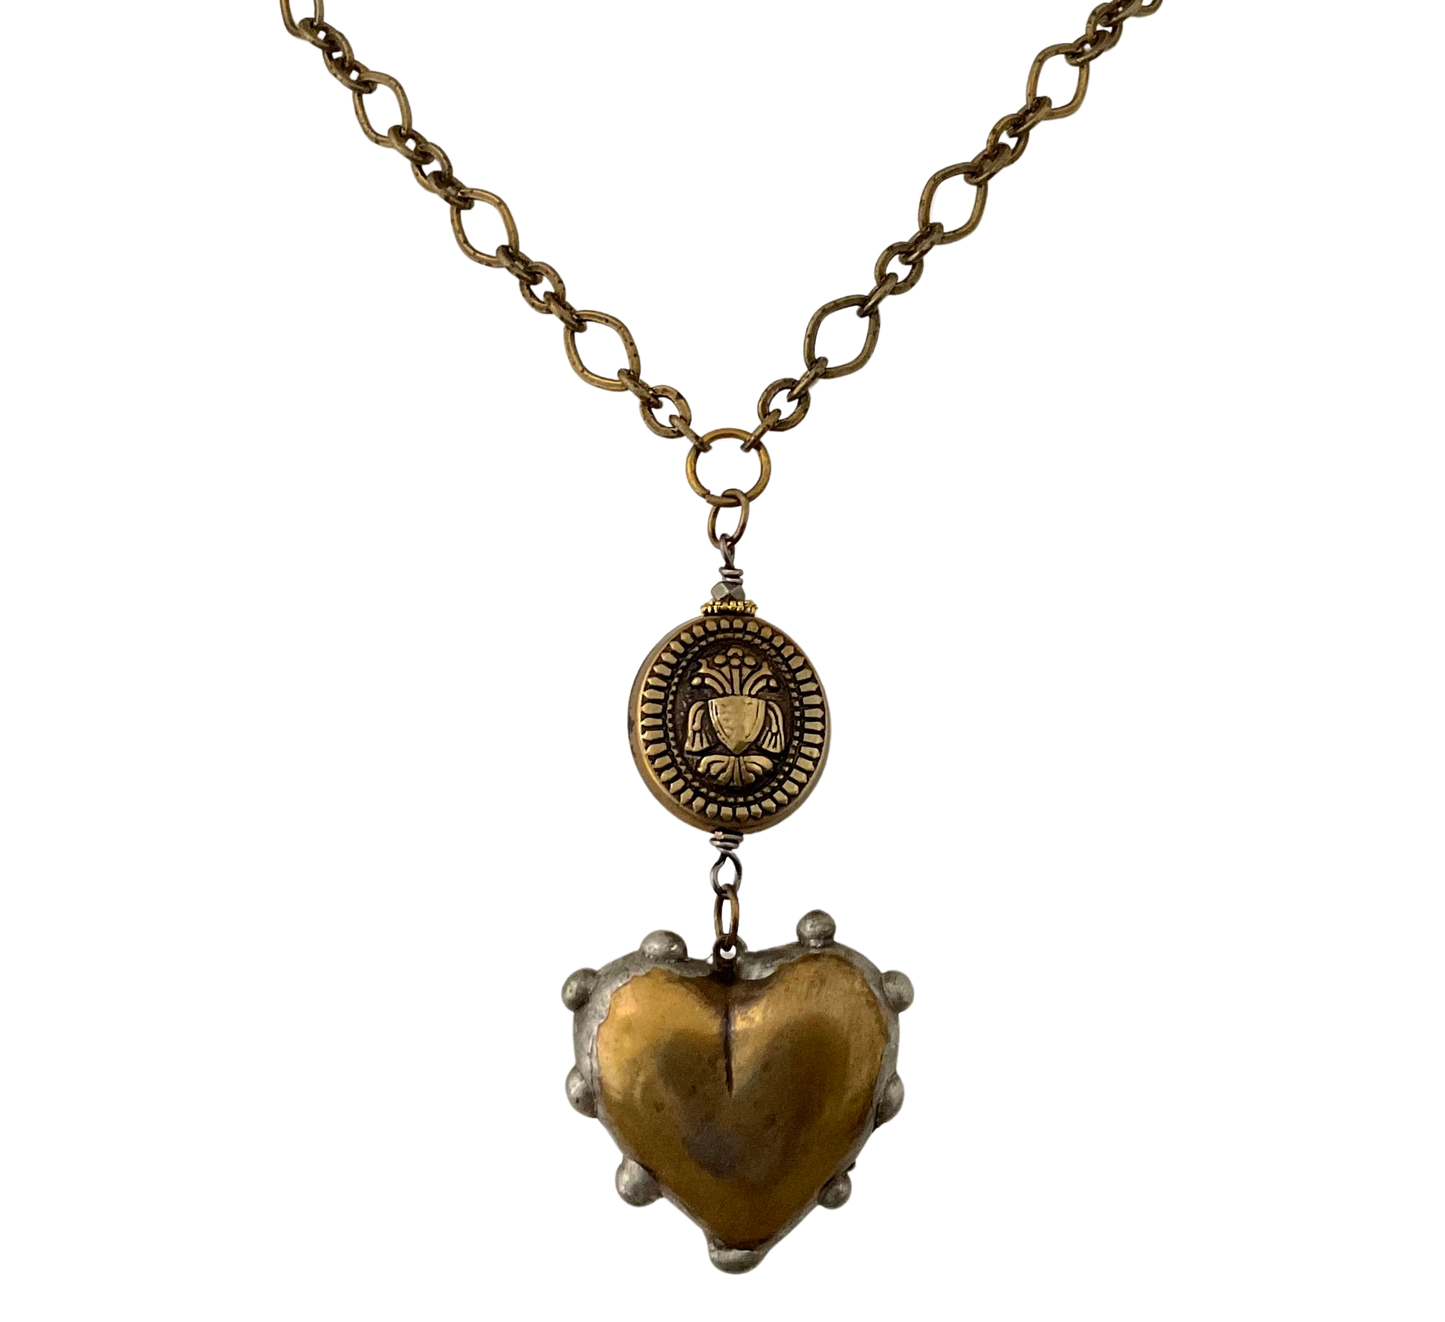 Vintage Chain with Soldered Heart & Vintage Connector 20"